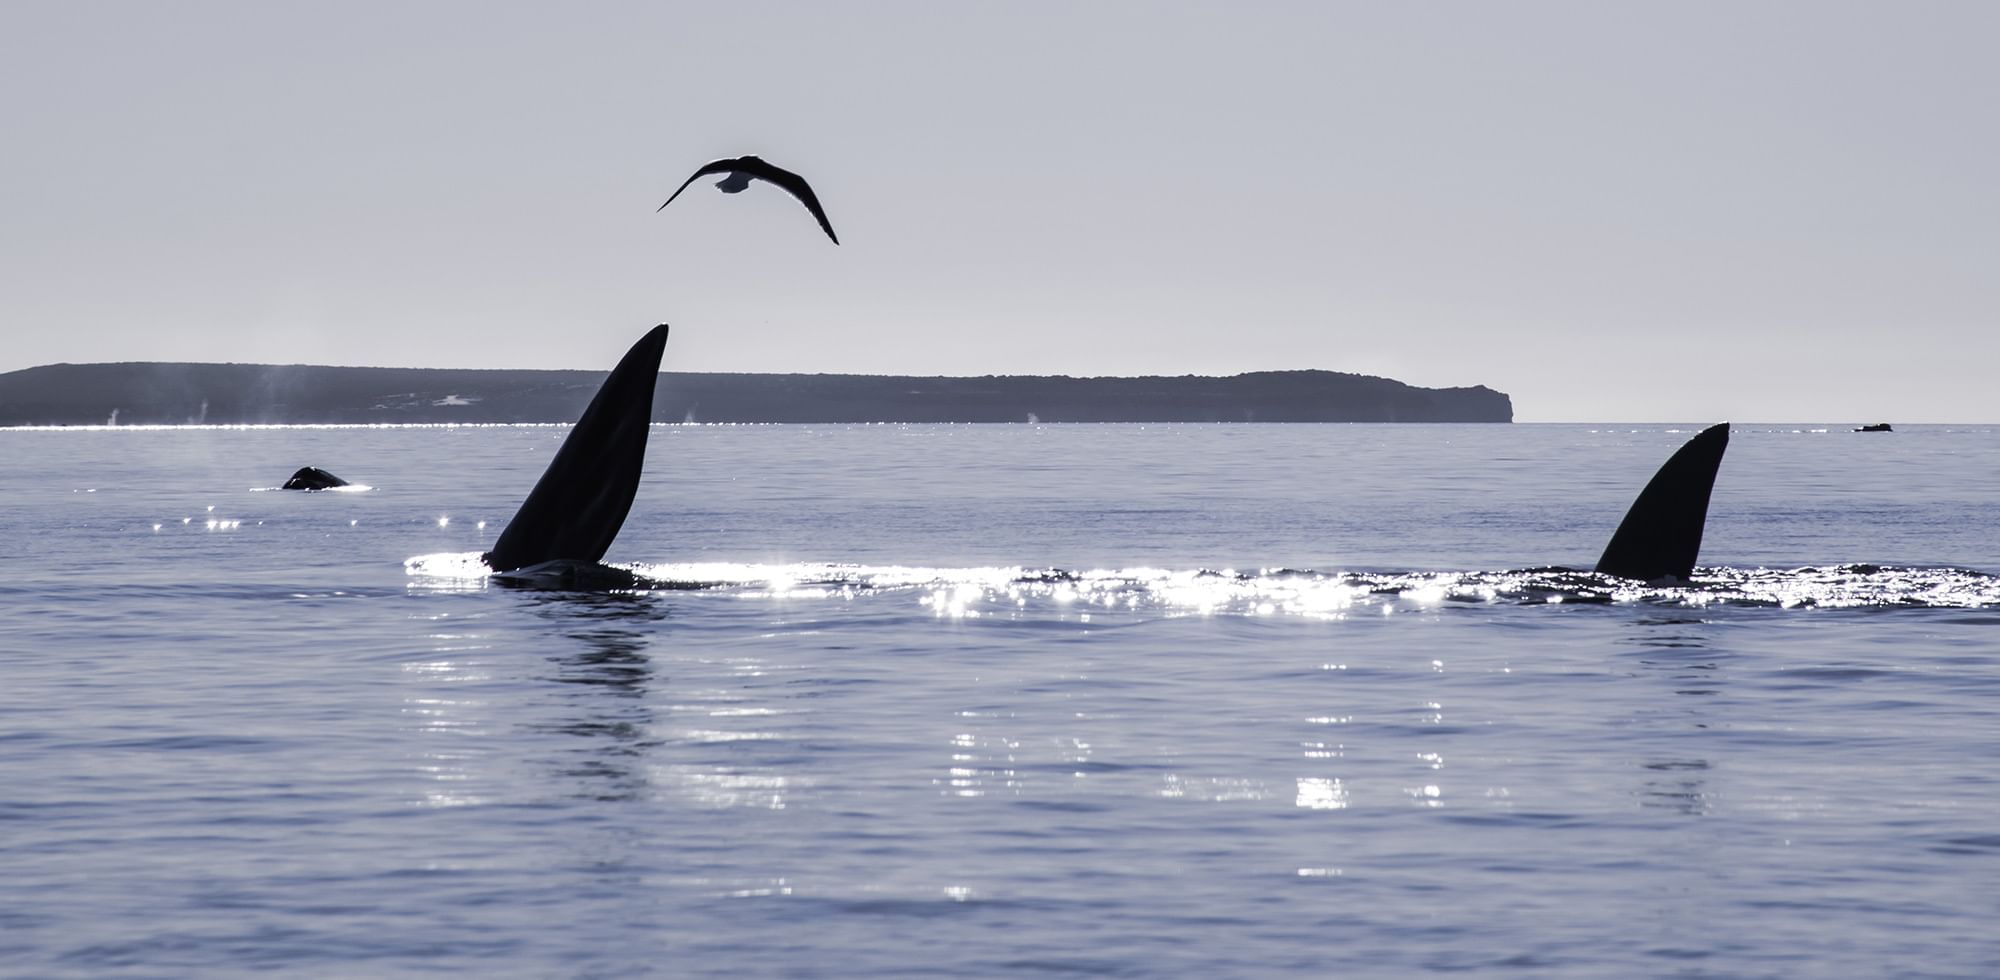 Two orcas dorsal fin's with a bird in the sky